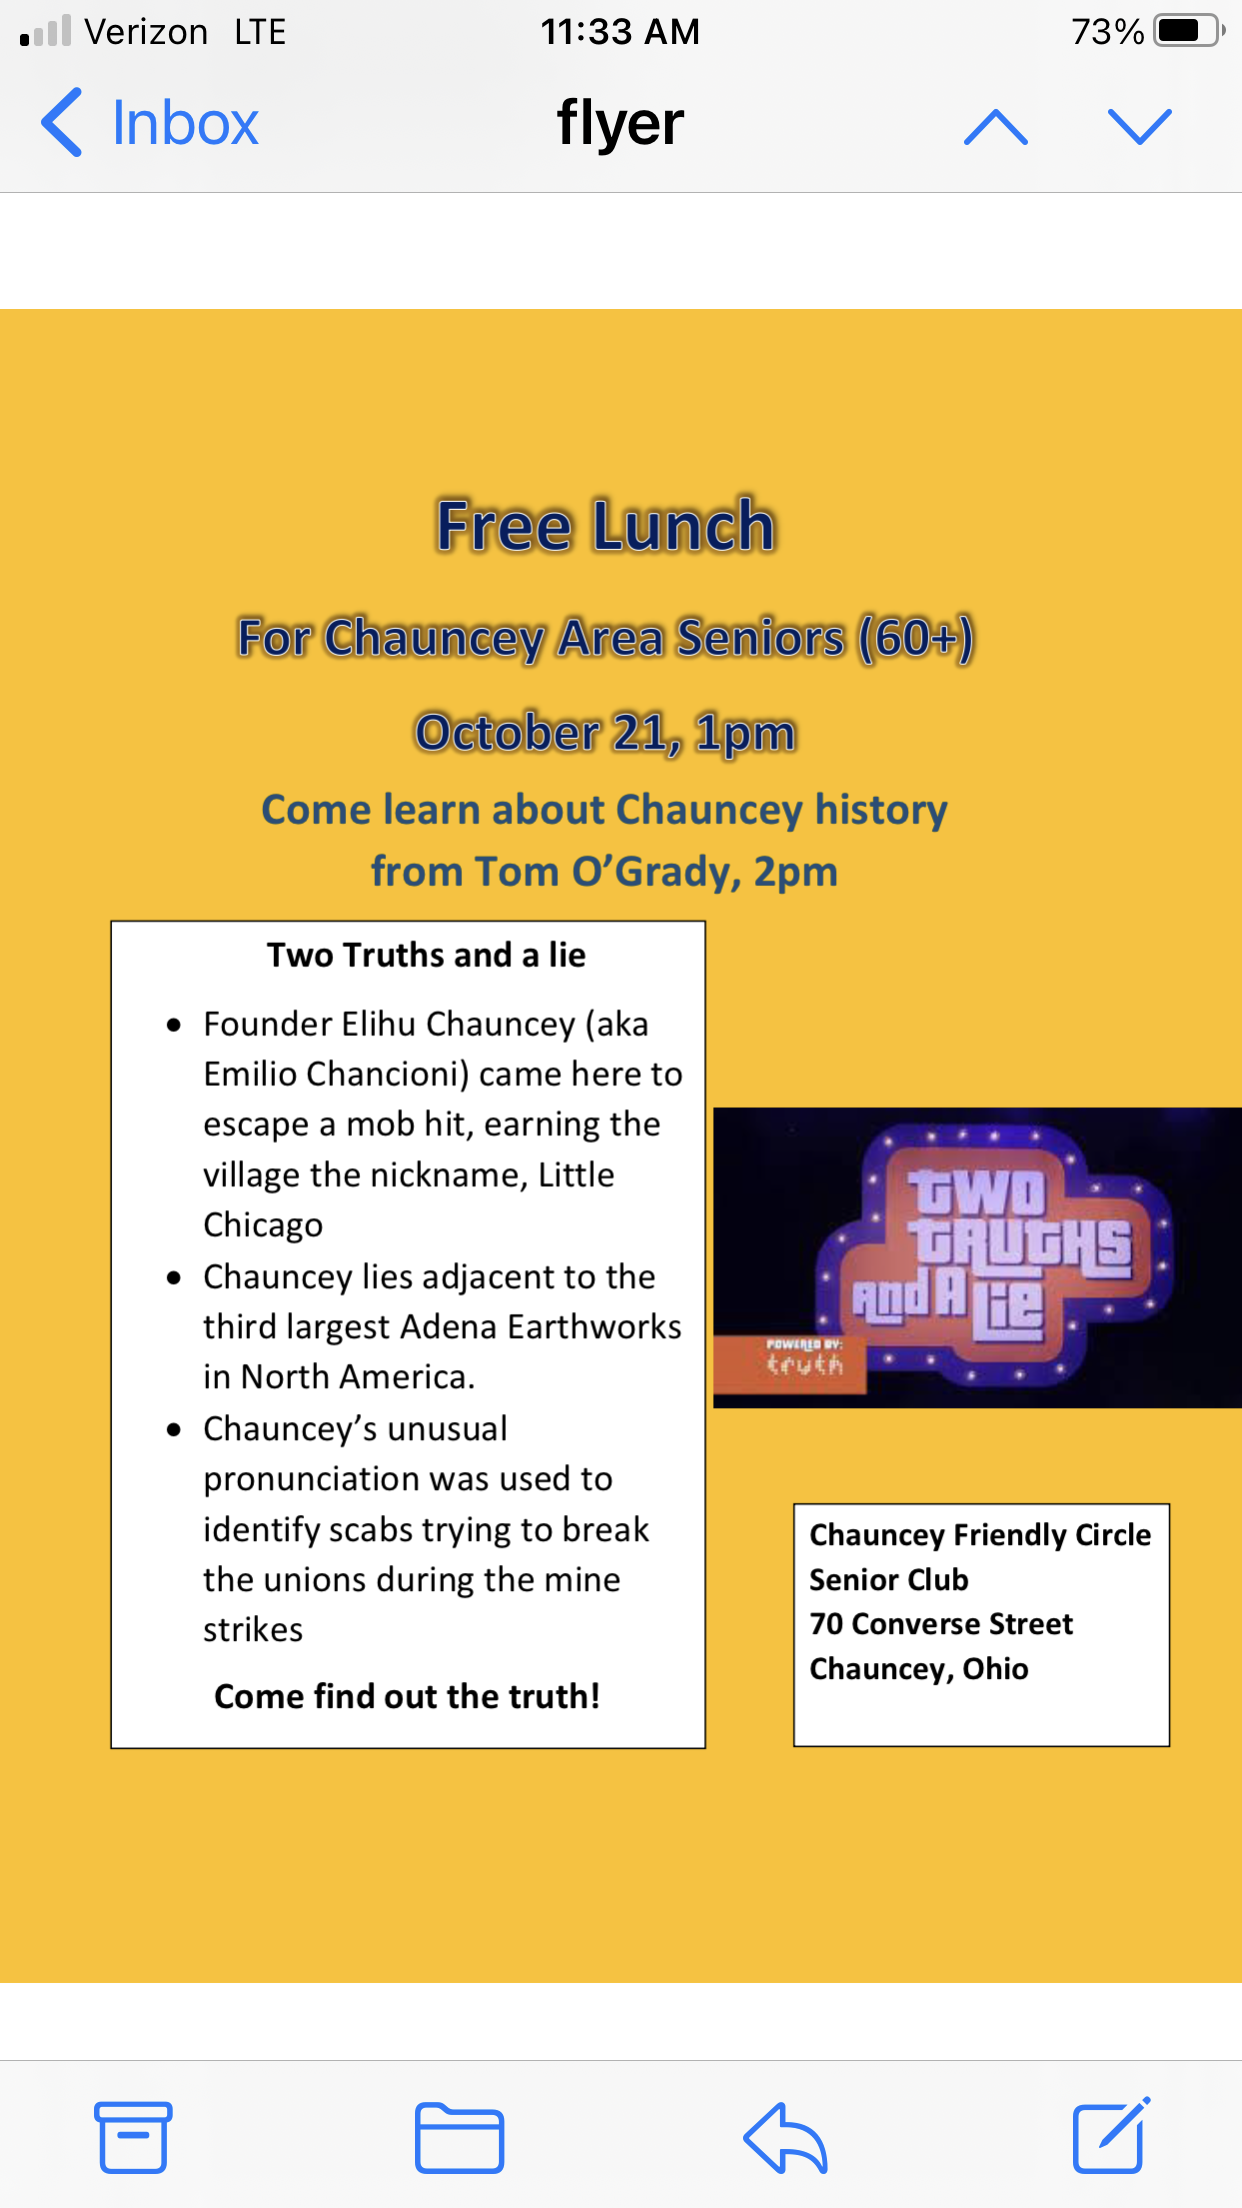 A yellow flyer reading: free lunch for Chauncey area seniors (60+) October 21, 1 p.m. come learn about Chauncey history from tom O'Grady 2 p.m. Two truths and a lie: Founder Elihu Chancion came here to escape a mob hit, earning him the nickname Little Chicago; Chauncey lays adjacent to the third largest Adena Earthworks in north America; Chauncey's unusual pronunciation was used to identify scabs trying to break the union during the mine strikes. Come and find out the truth!